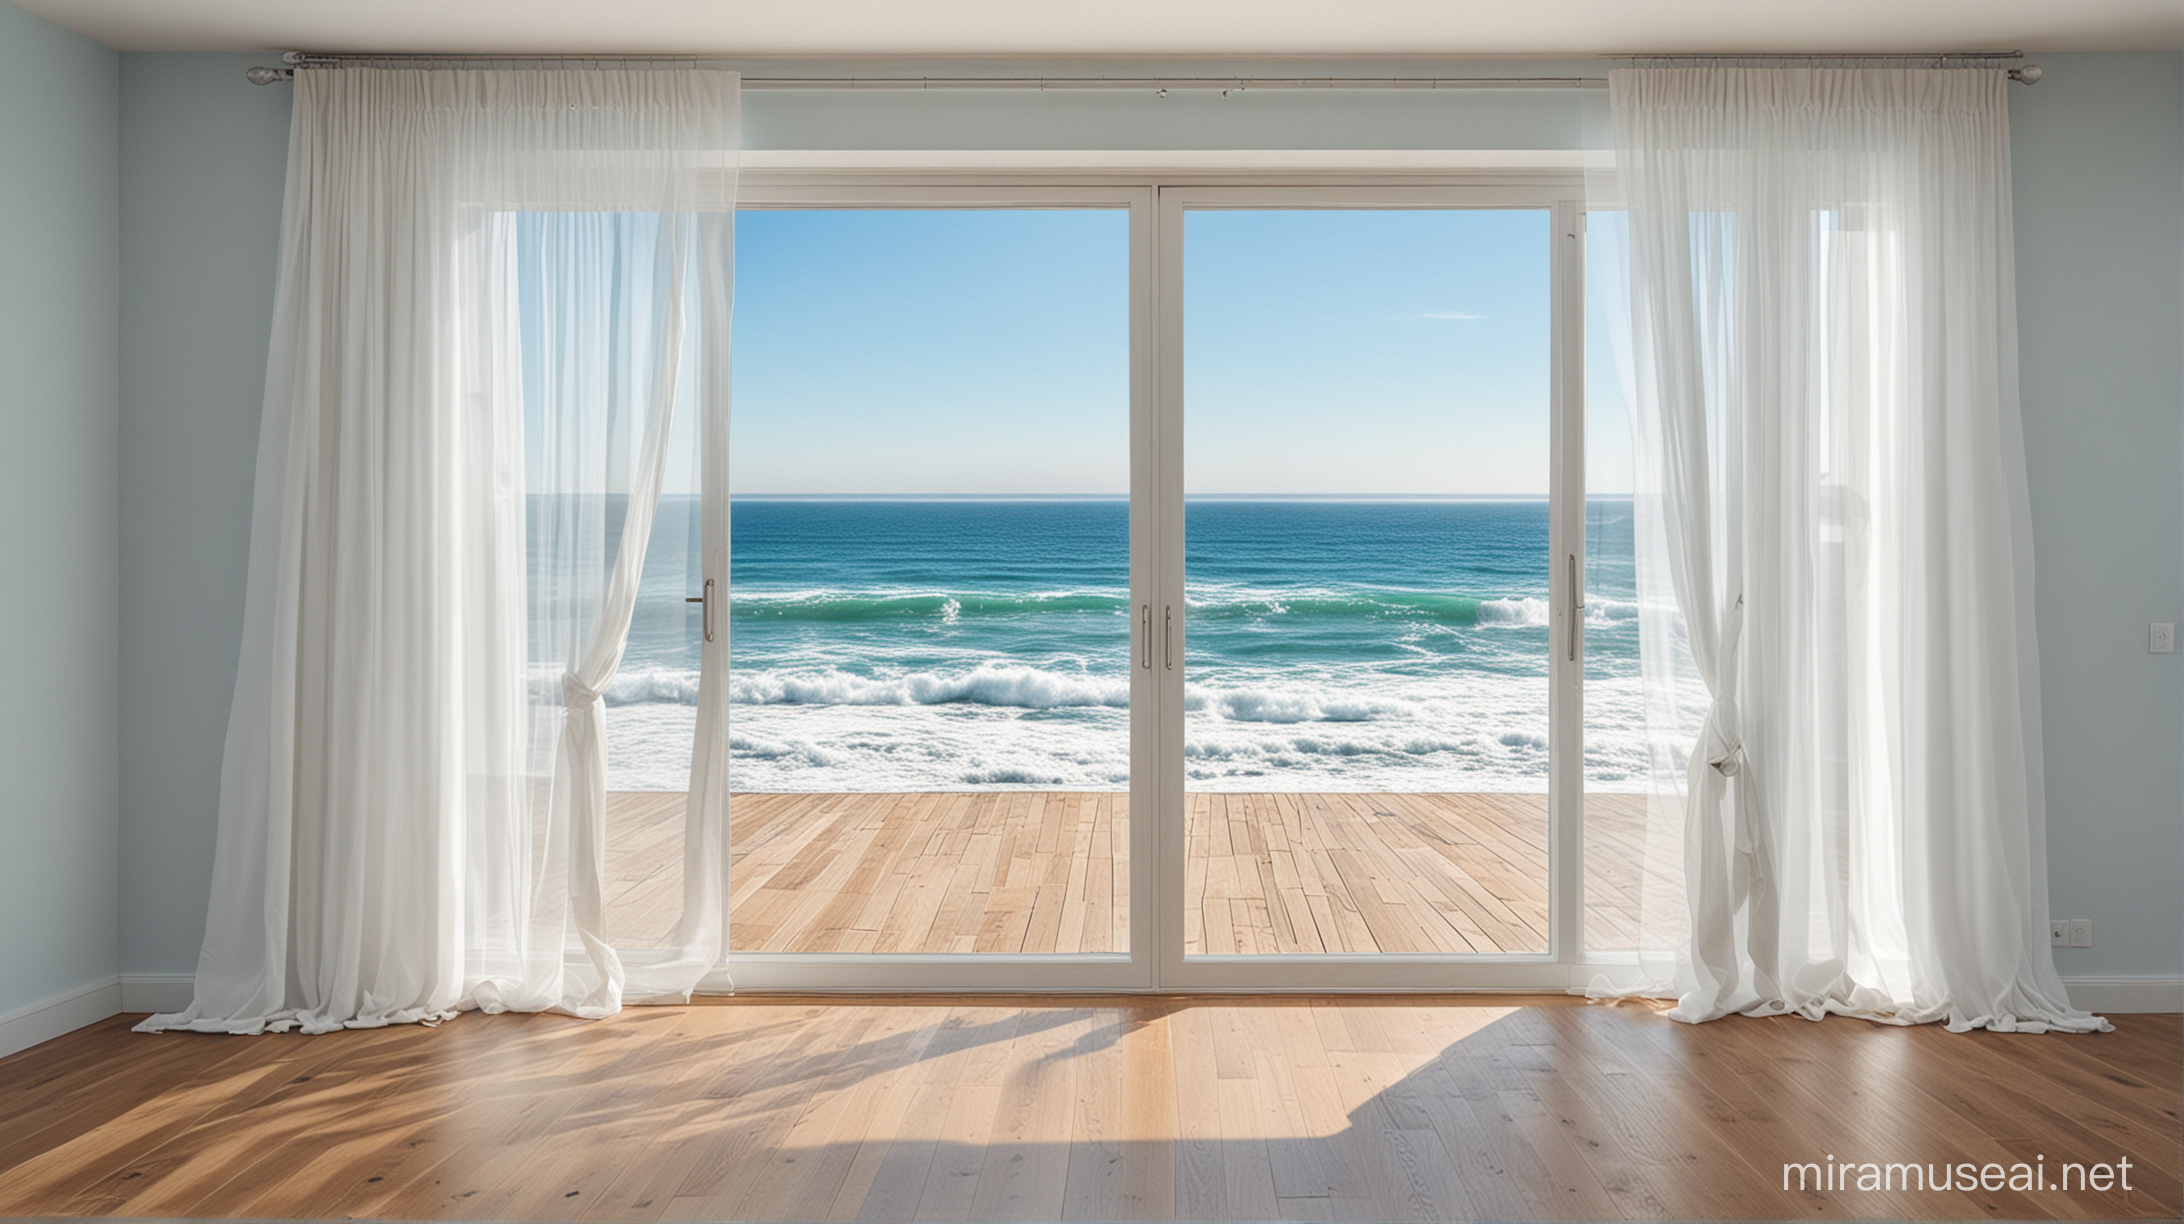 a serene and tranquil coastal scene, with a large window or sliding glass door framed by billowing white curtains. Through the transparent draperies, one can see the vast, sparkling expanse of a blue ocean, glistening under a bright, sunny sky. The curtains appear to be made of a lightweight, sheer material, allowing the natural light to filter through and illuminate the space.

The wooden floor in the foreground adds a warm, earthy tone to the composition, contrasting with the cool blues and whites of the ocean and curtains. The subtle shadows cast by the curtains create a sense of depth and movement, suggesting a gentle breeze passing through the room.

Overall, the image evokes a sense of calmness, relaxation, and connection with nature, inviting the viewer to imagine themselves in this tranquil, coastal setting.